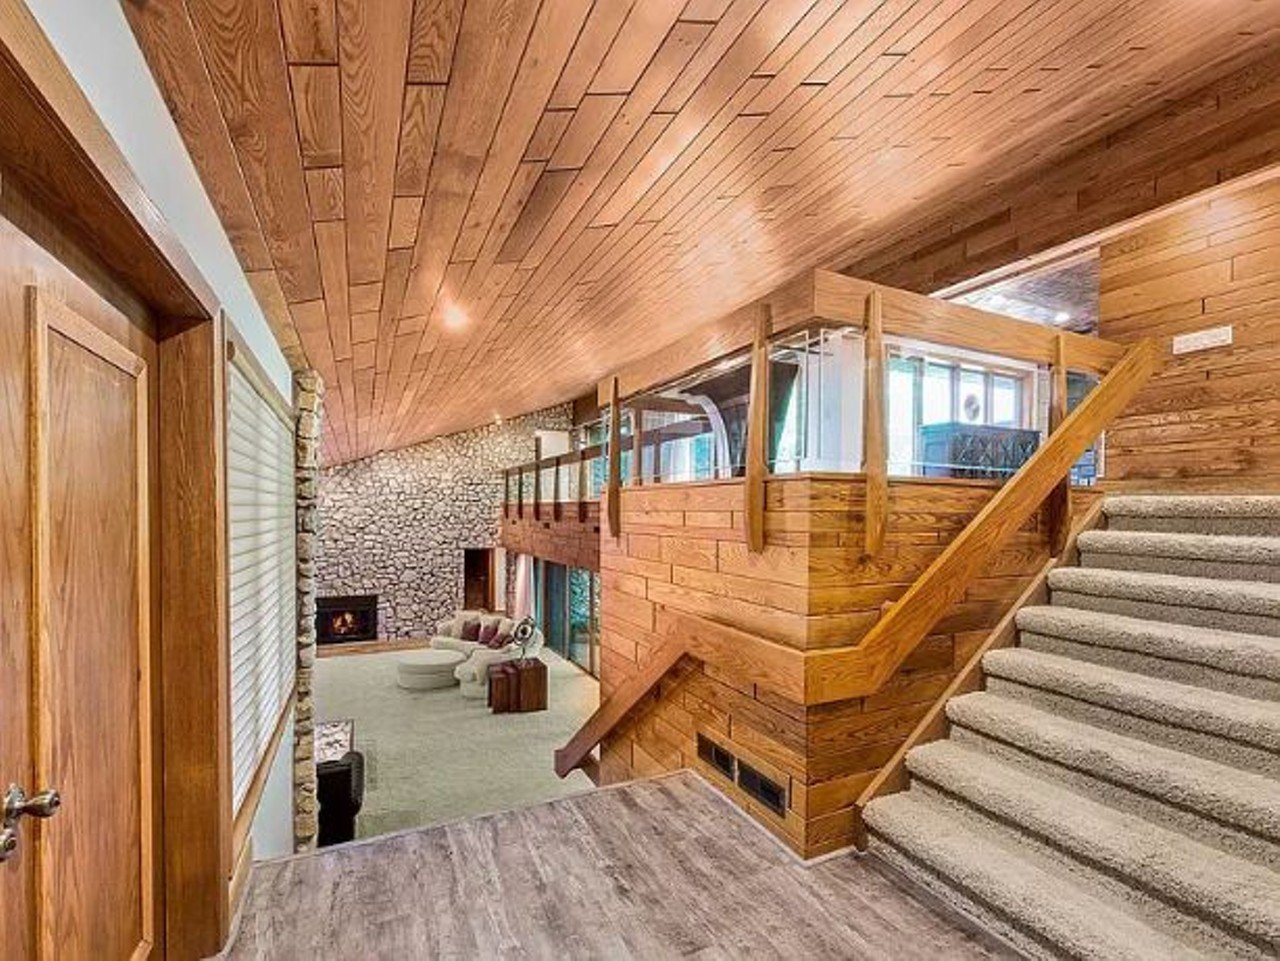 This Northern Indiana Home Has A Sauna, Mid-Century Charm, And A Cave